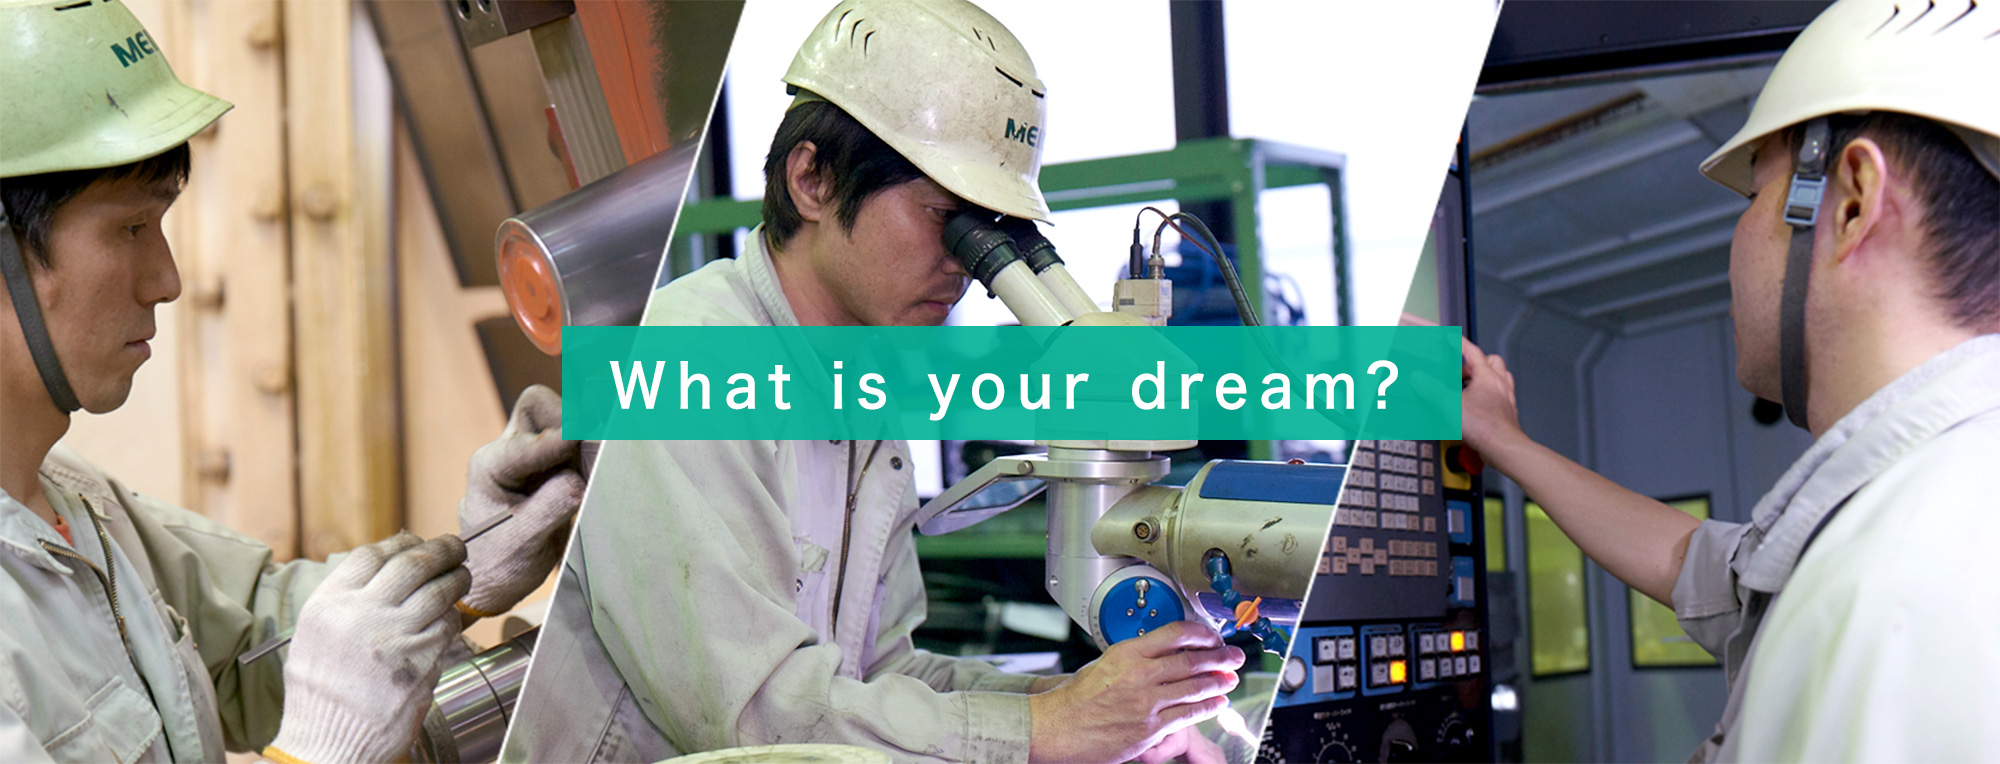 What is your dream?